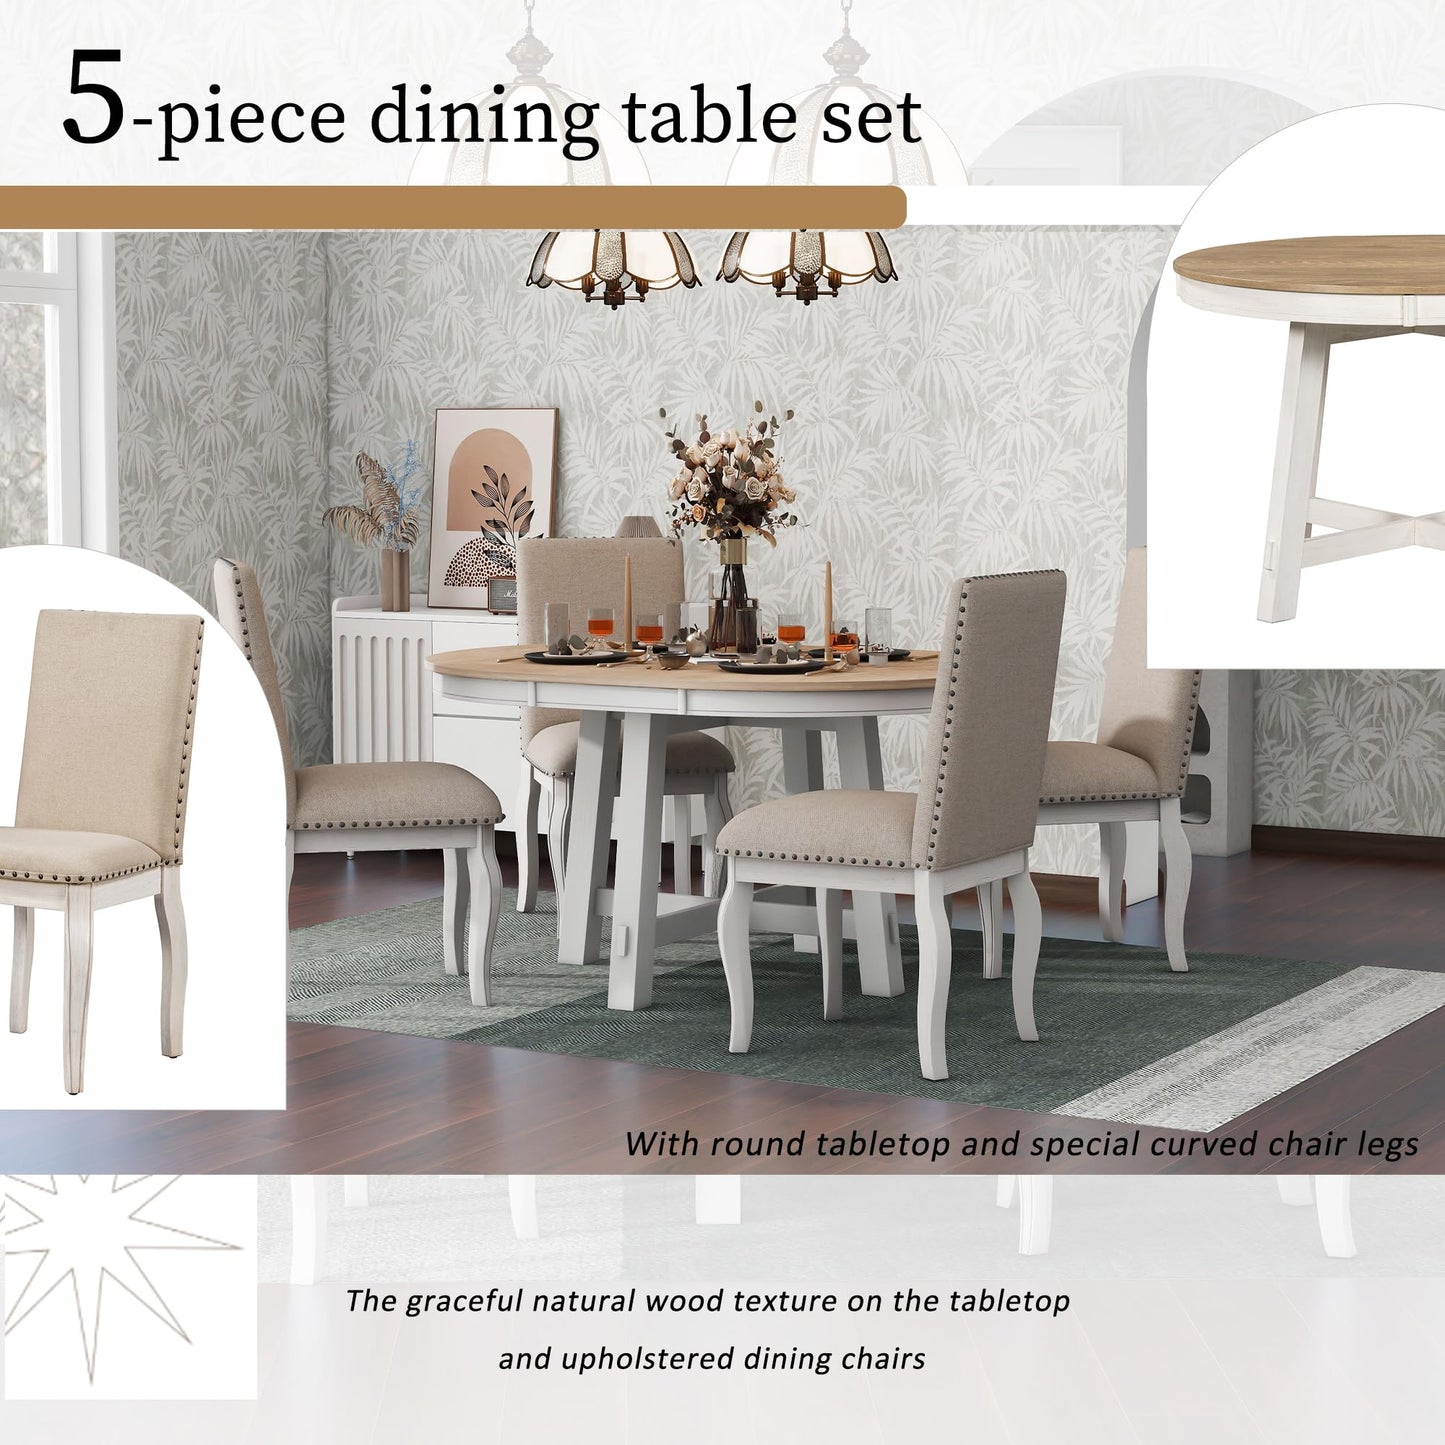 DESIGNER97 5-Piece Farmhouse Dining Table Set, Wood Round Extendable Oval Dining Table and 4 Upholstered Dining Chairs for Dining Room Kitchen Oak+Antique White